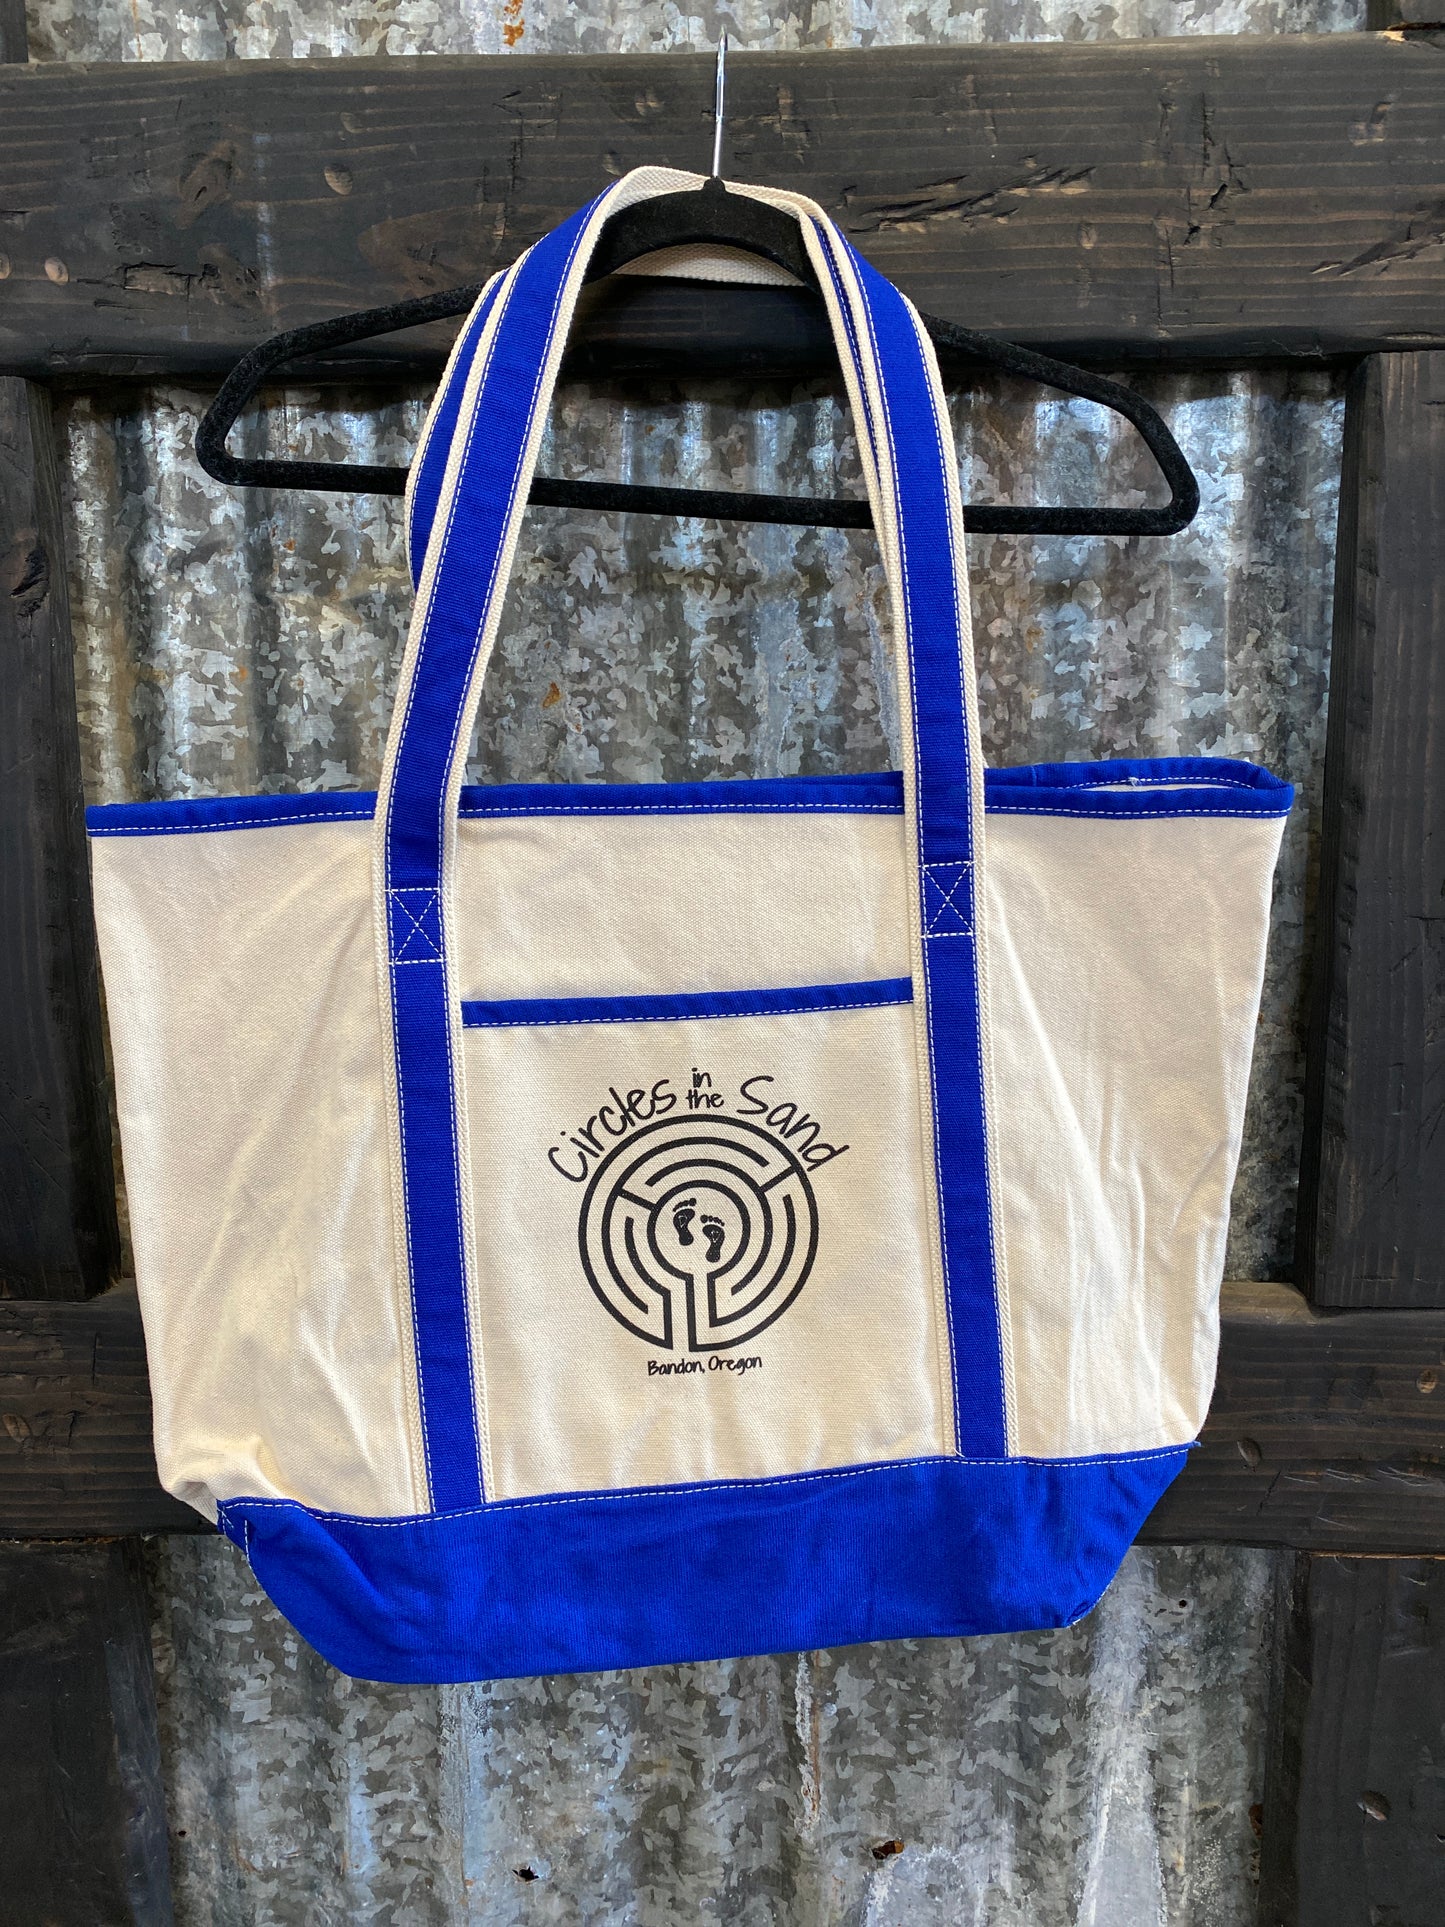 Tote bag in natural with royal blue contrast.